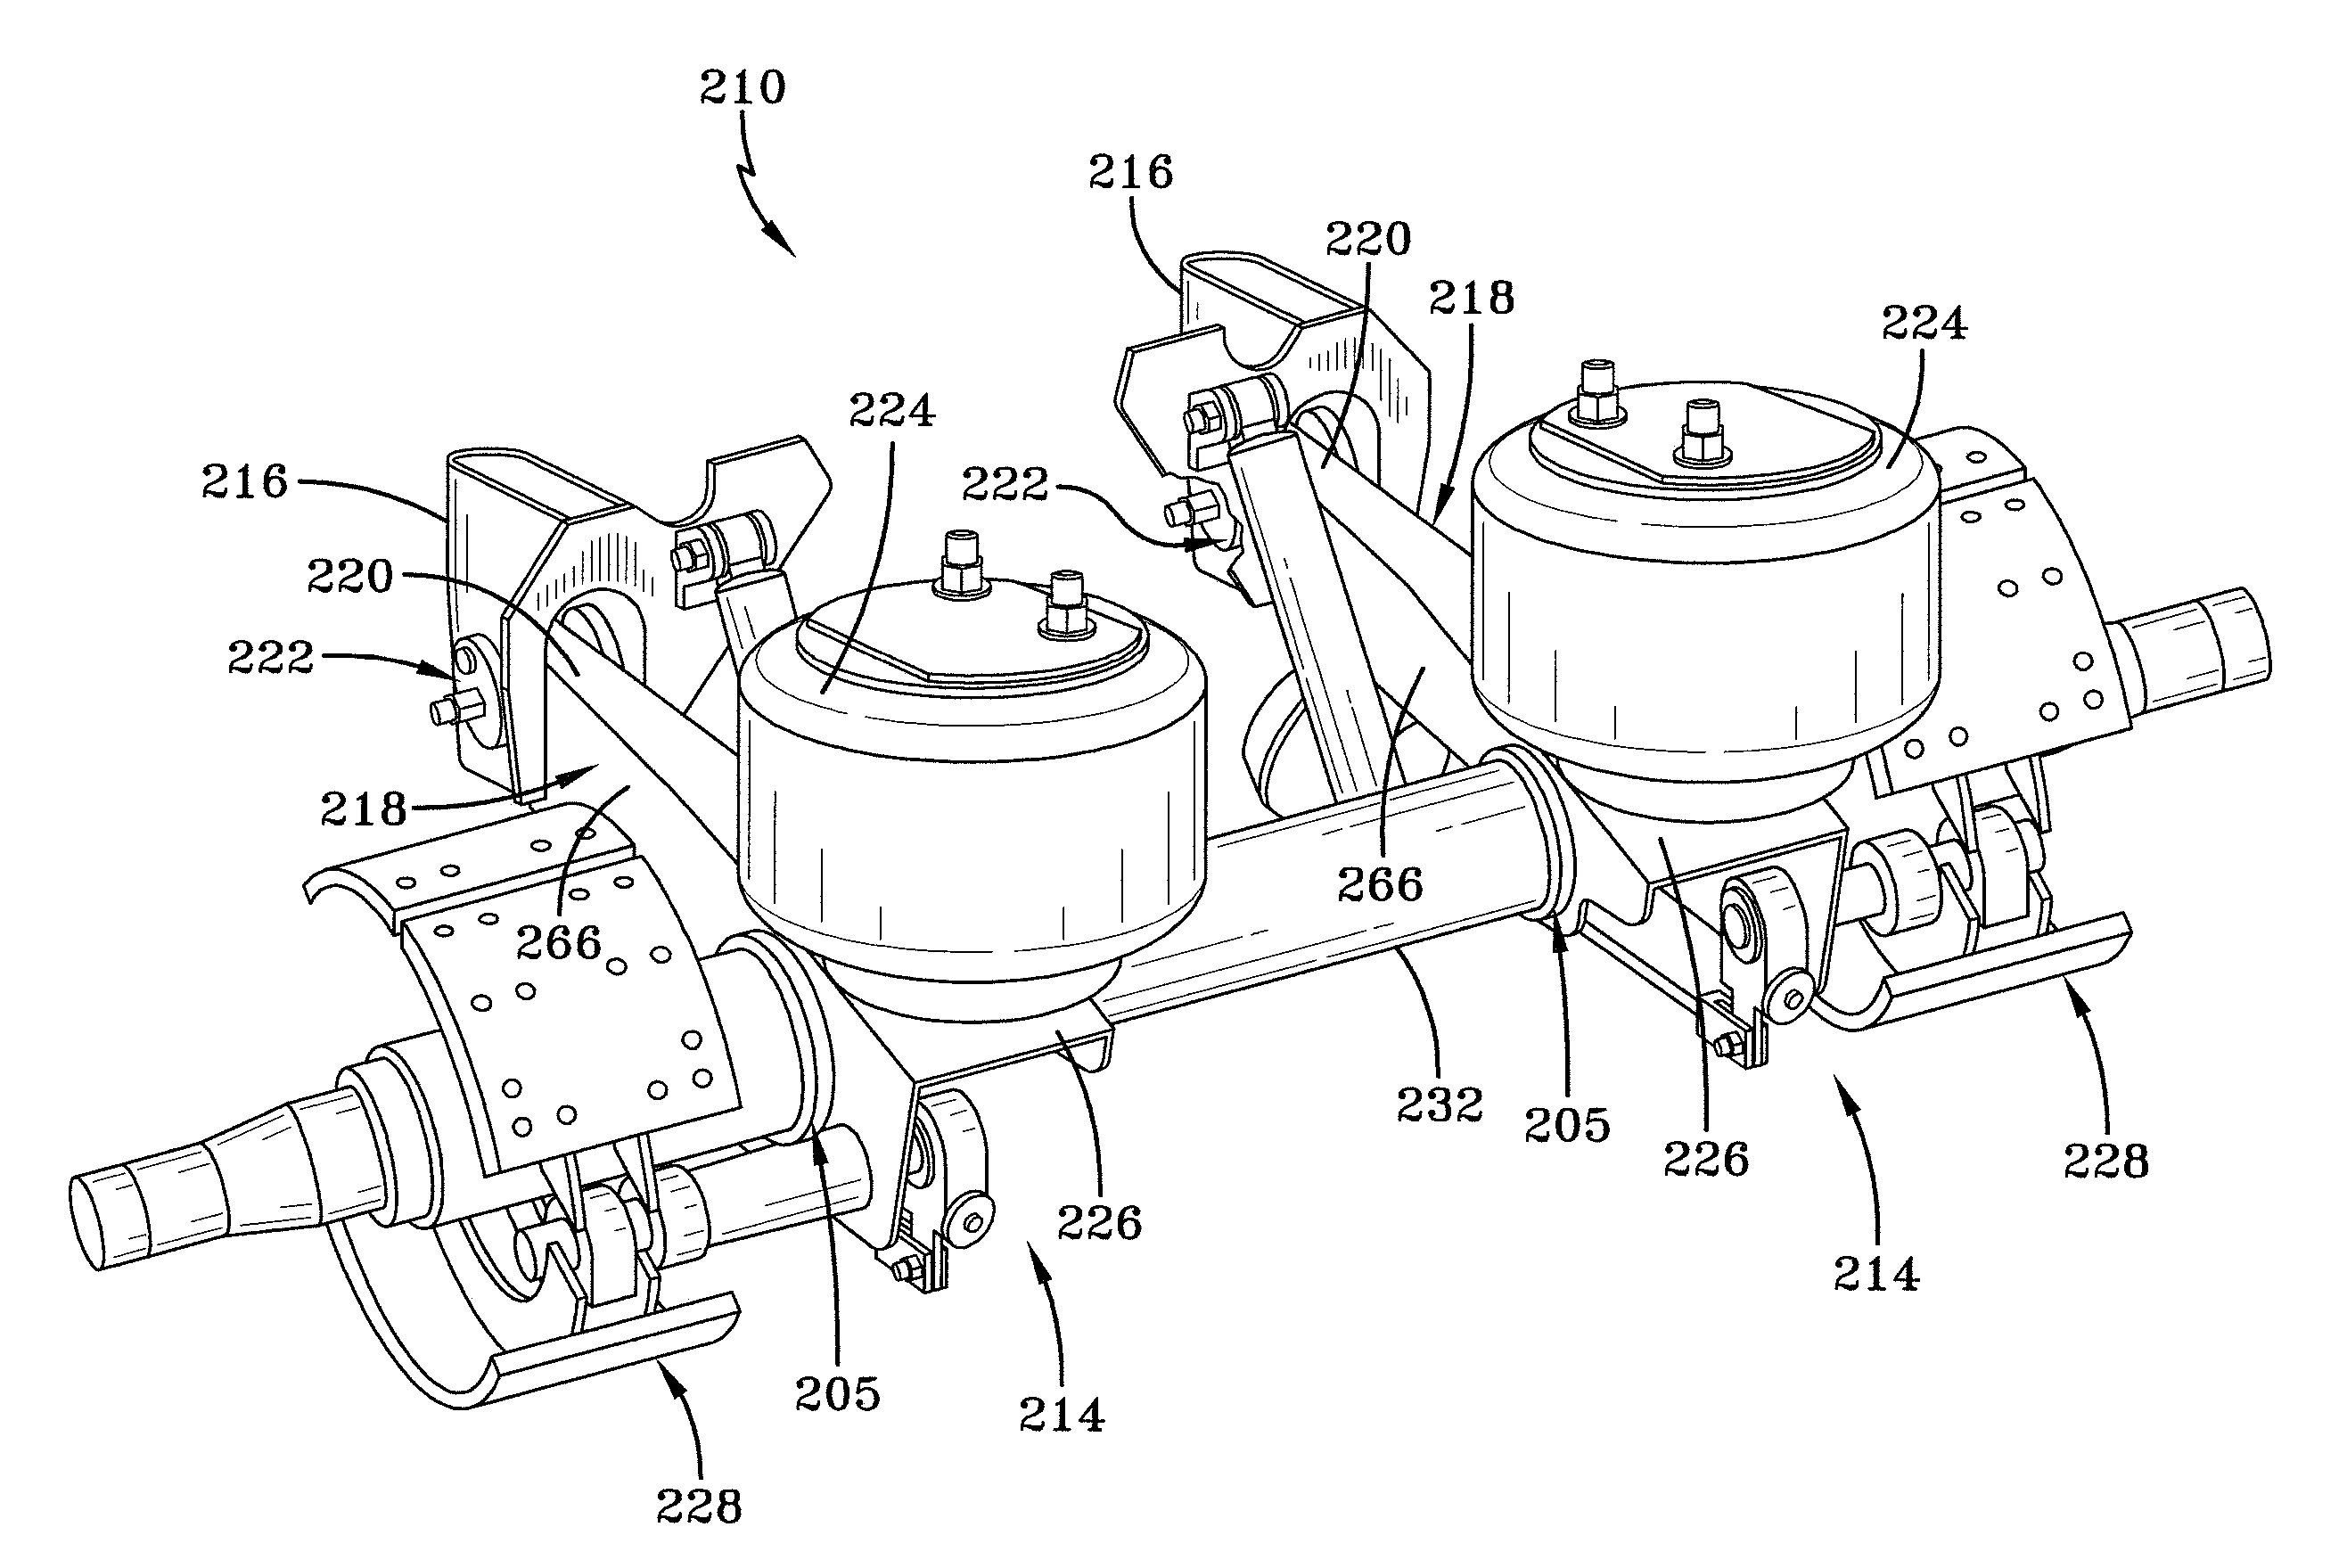 Heavy-duty vehicle axle-to-beam or crossbrace-to-beam connection